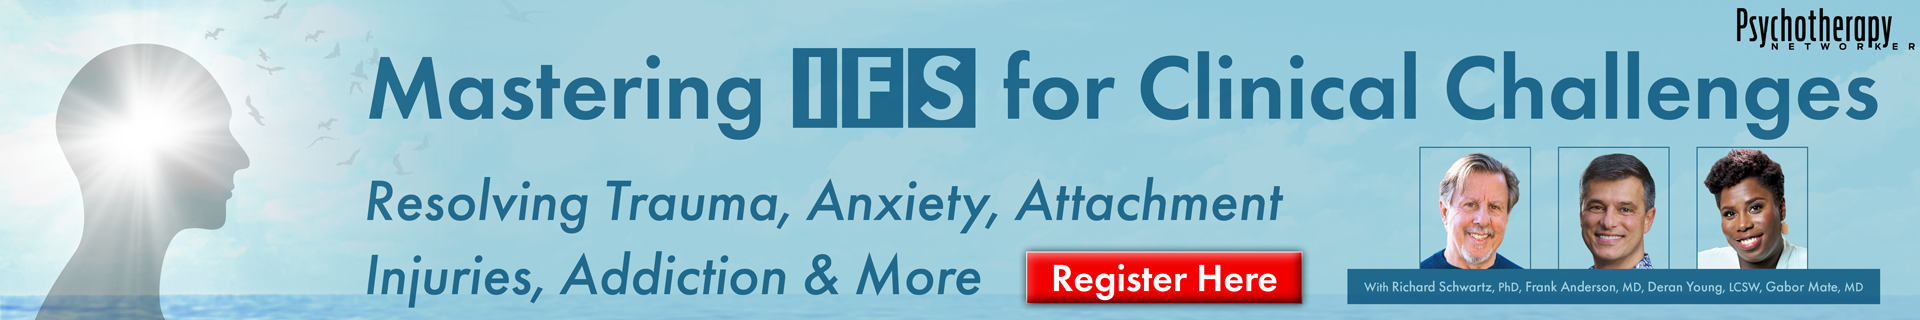 Mastering IFS for Clinical Challenges: Resolving Trauma, Anxiety, Attachment Injuries, Addiction & More